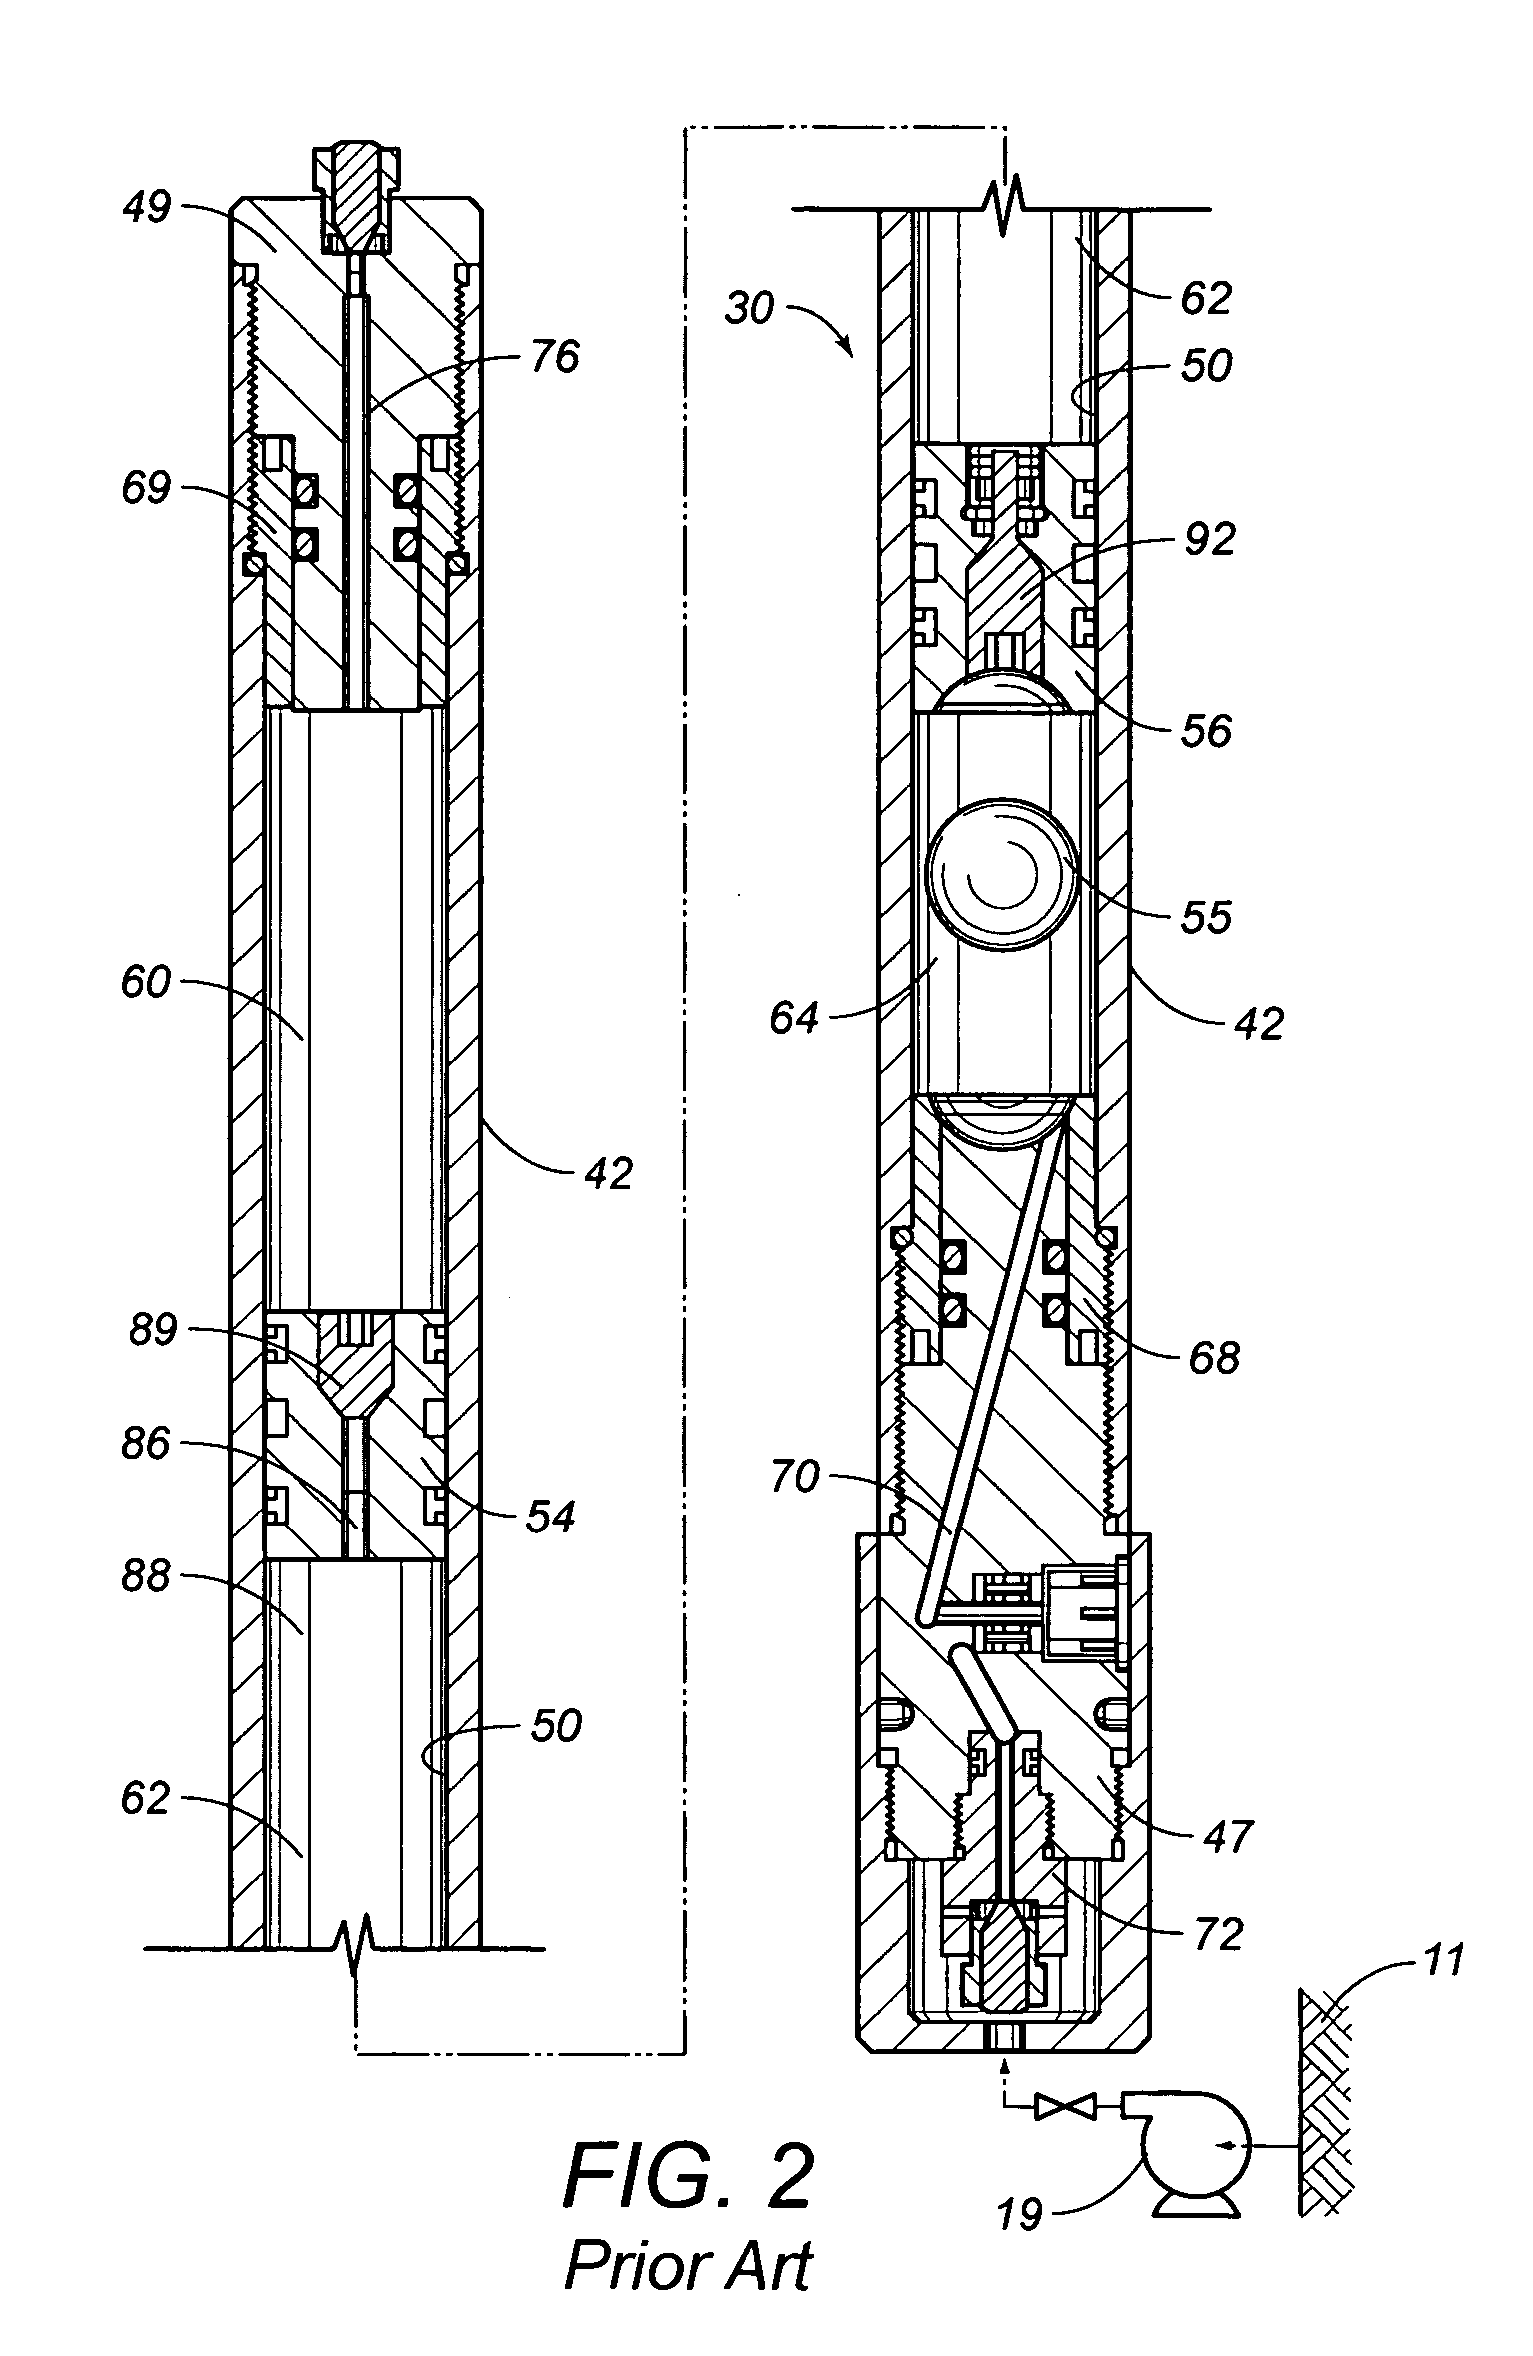 Apparatus and methods for acoustically determining fluid properties while sampling